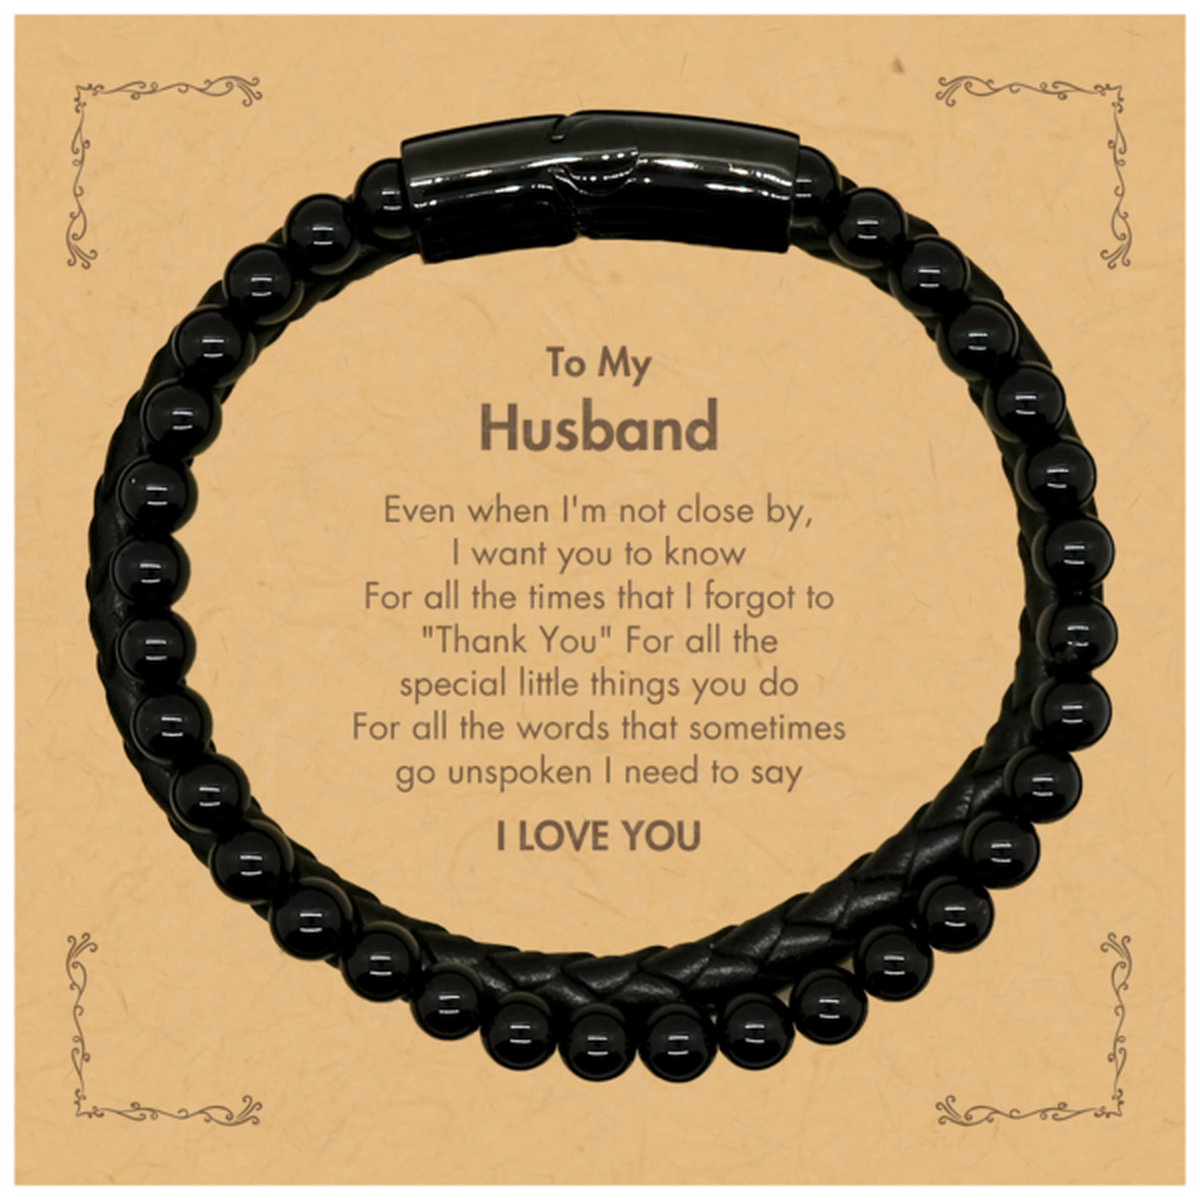 Thank You Gifts for Husband, Keepsake Stone Leather Bracelets Gifts for Husband Birthday Mother's day Father's Day Husband For all the words That sometimes go unspoken I need to say I LOVE YOU